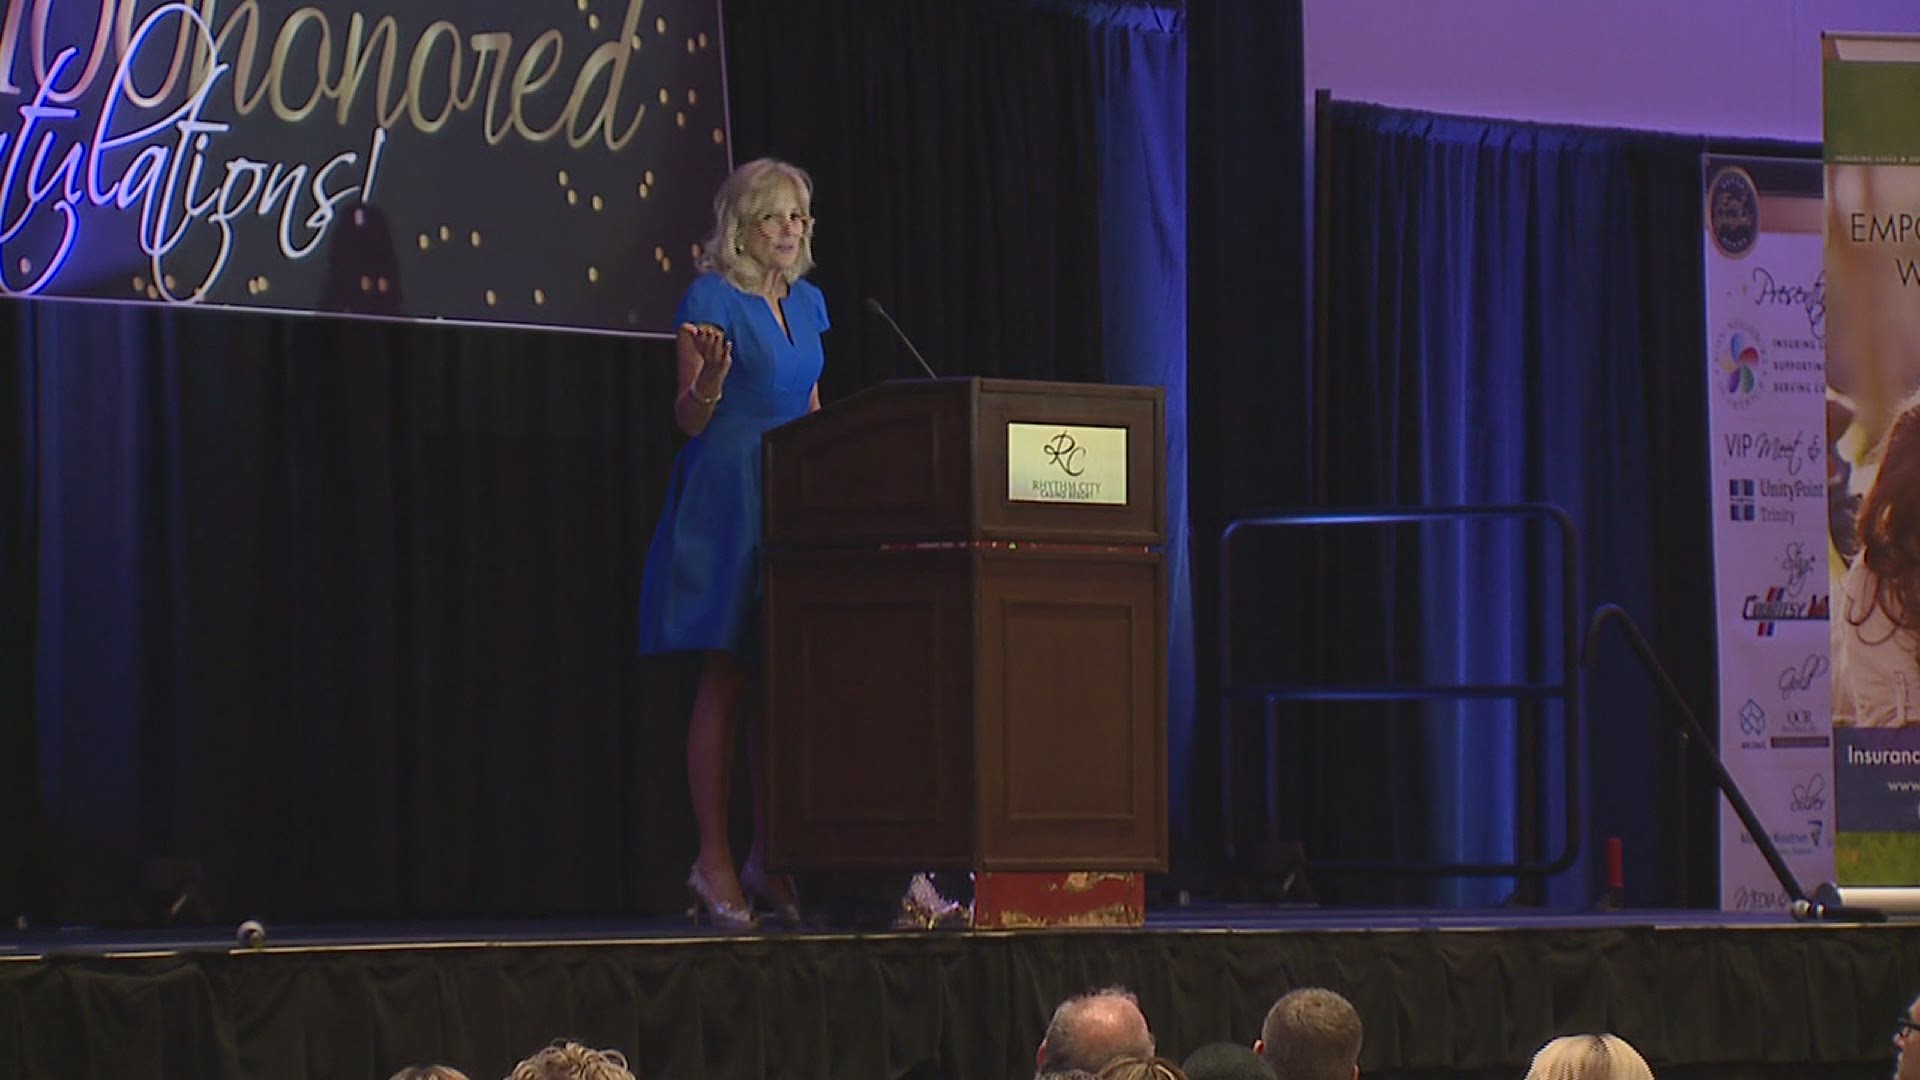 This visit marks Jill Biden's first appearance in Illinois since becoming First Lady.